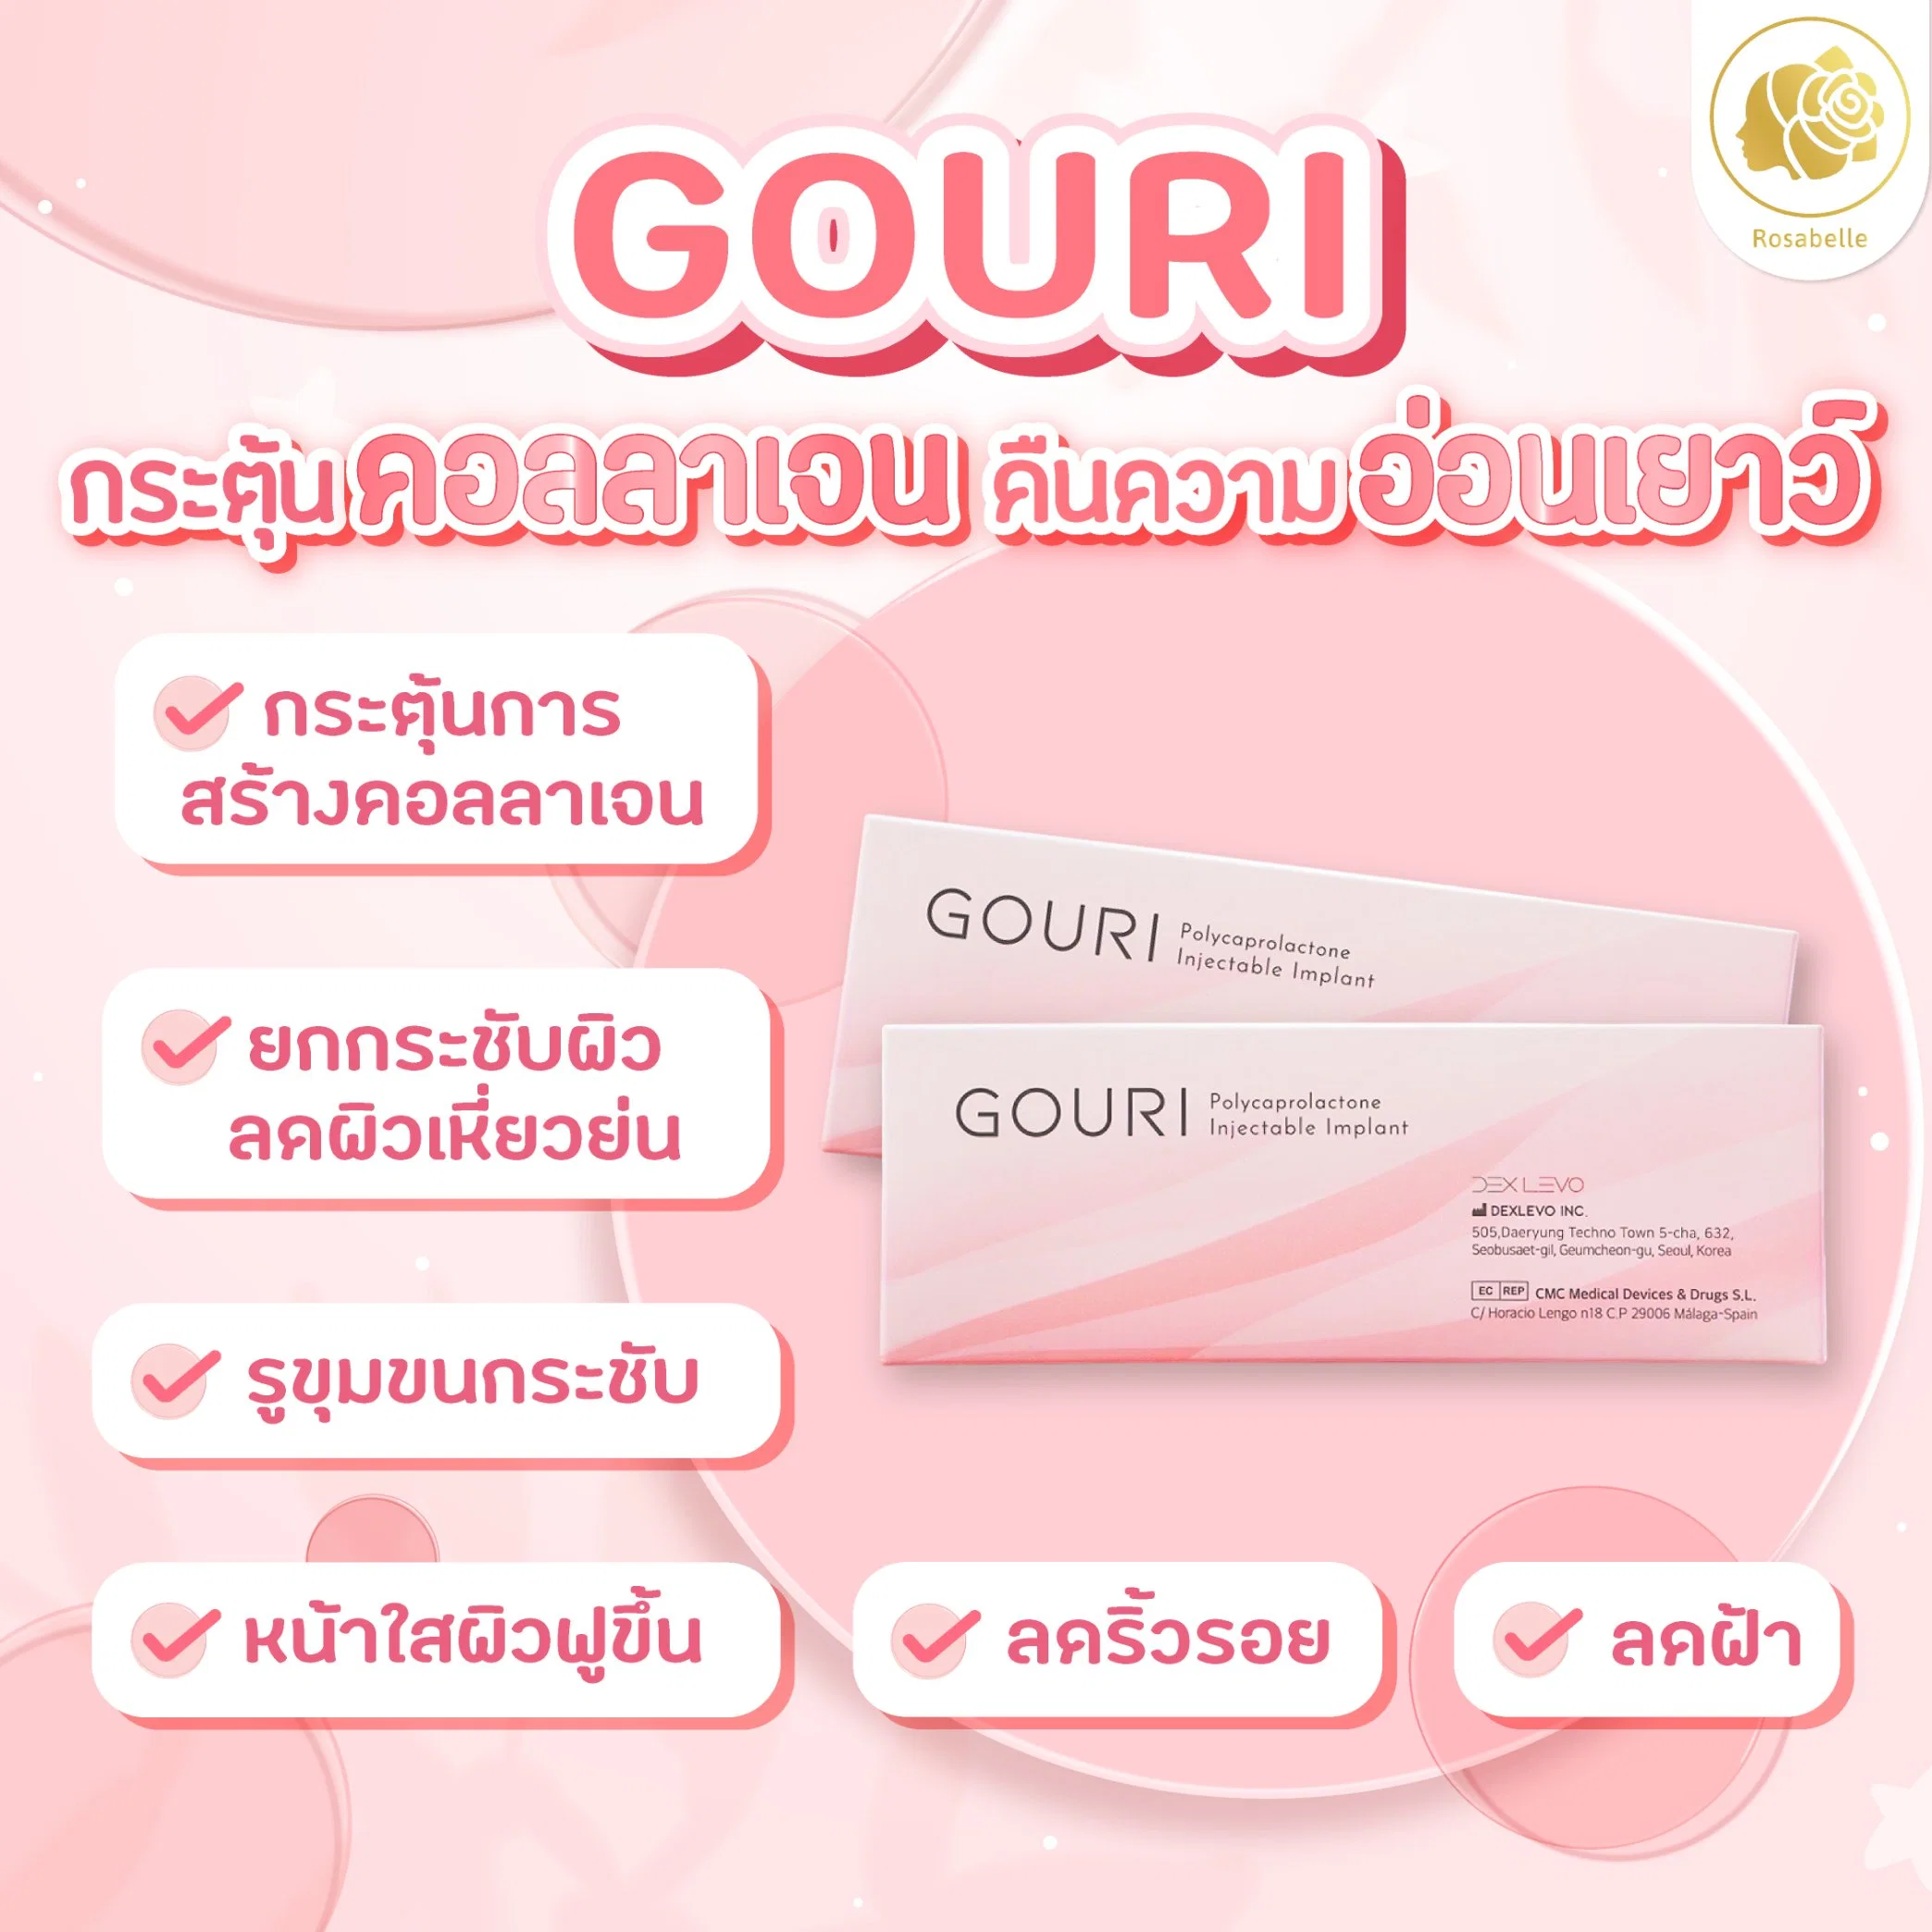 There Fill Collagen injection Dermal Filler Gouri Pcl Filler Pcl Collagen Biostimulator Aging Like Fine Wine Made Possible Liquid Pcl Collagen Gouri